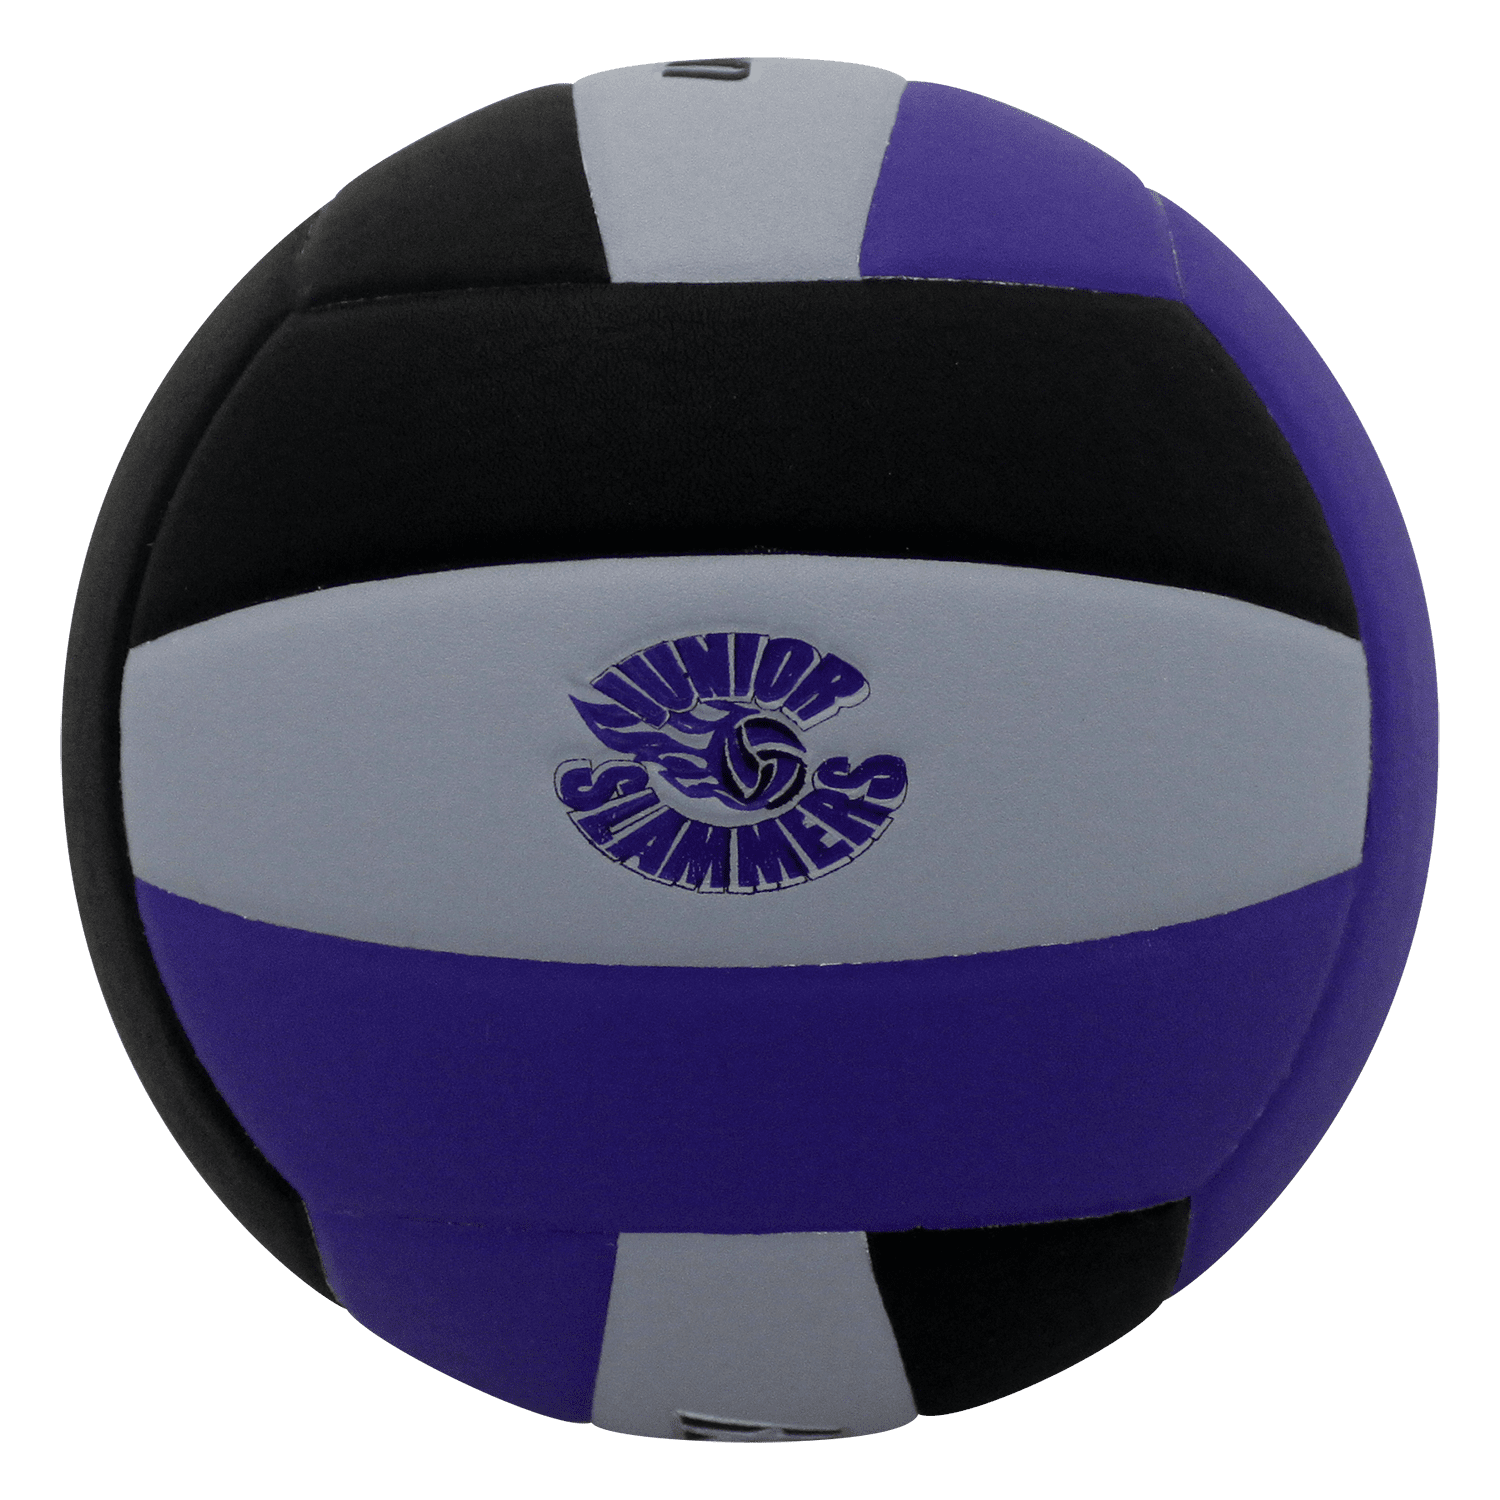 Volleyball equipment 100% personalised Qwalis